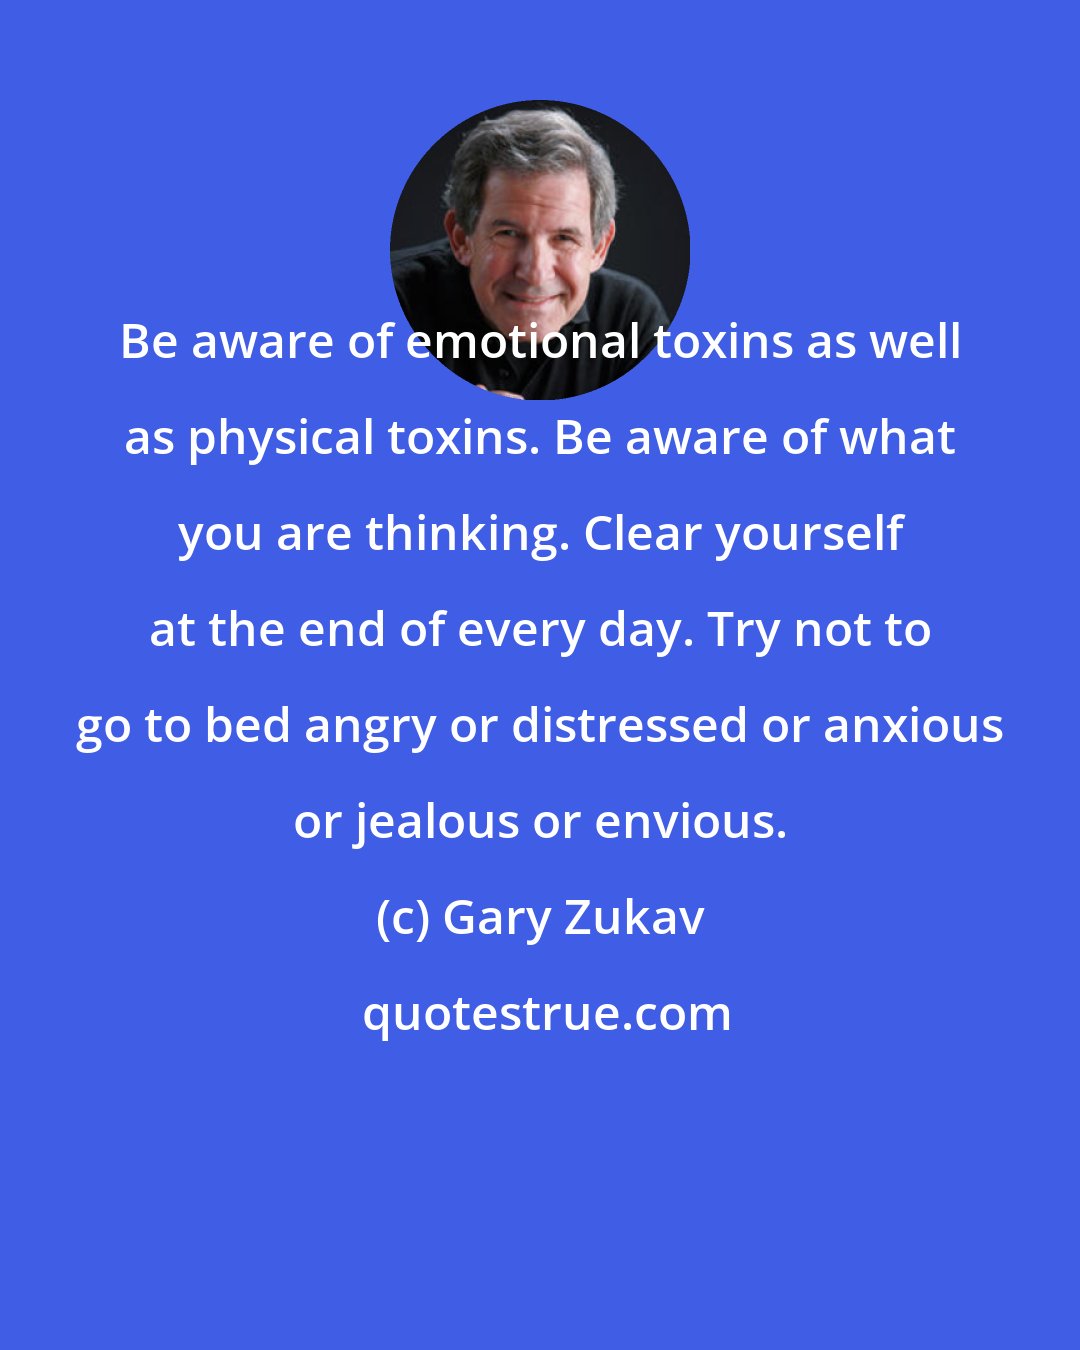 Gary Zukav: Be aware of emotional toxins as well as physical toxins. Be aware of what you are thinking. Clear yourself at the end of every day. Try not to go to bed angry or distressed or anxious or jealous or envious.